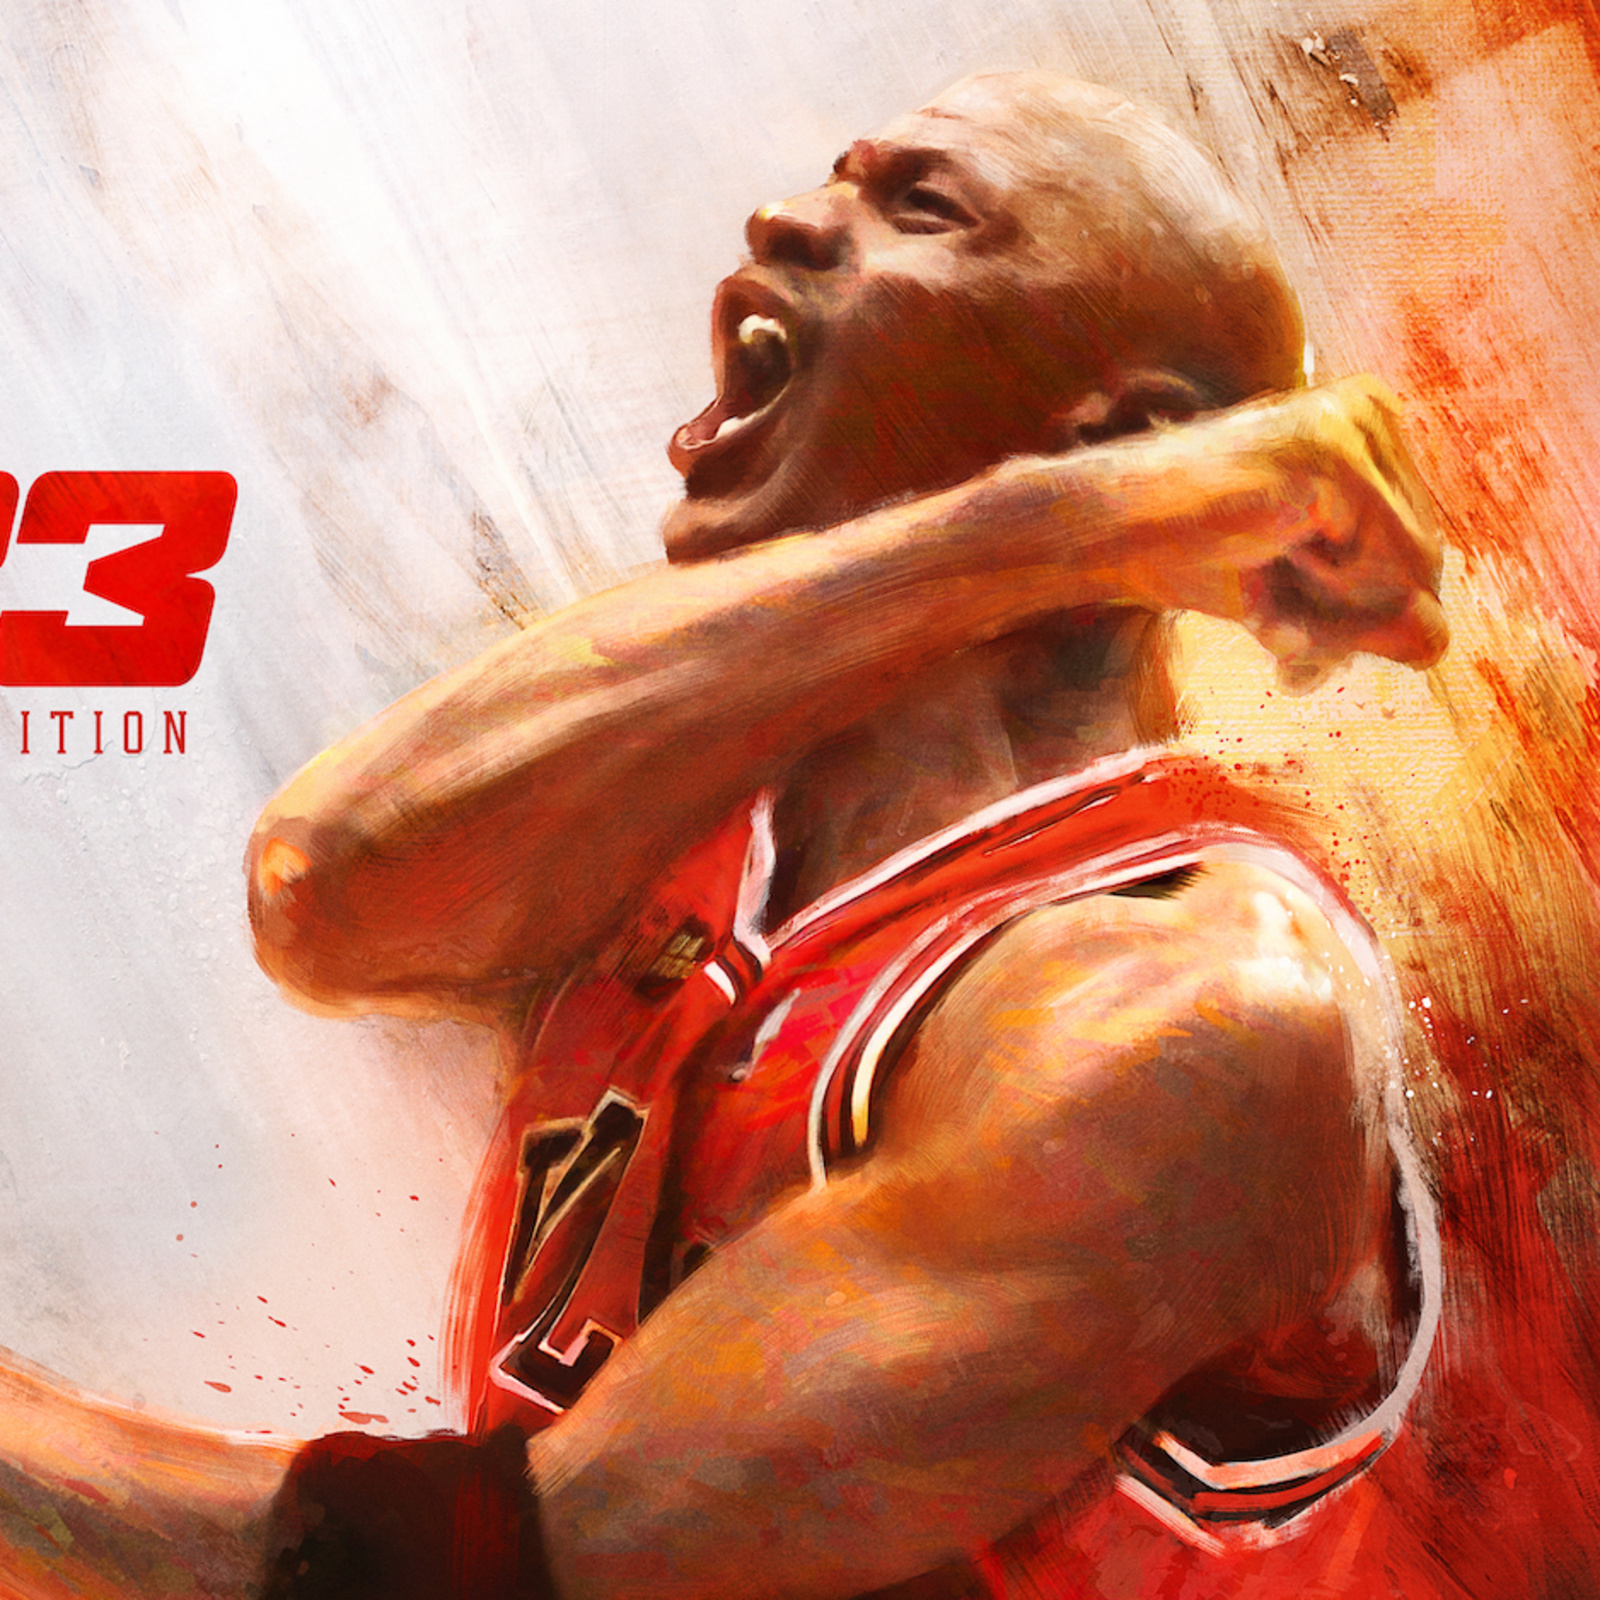 Michael Jordan is cover for Special Editions of NBA 2K23 - GadgetMatch